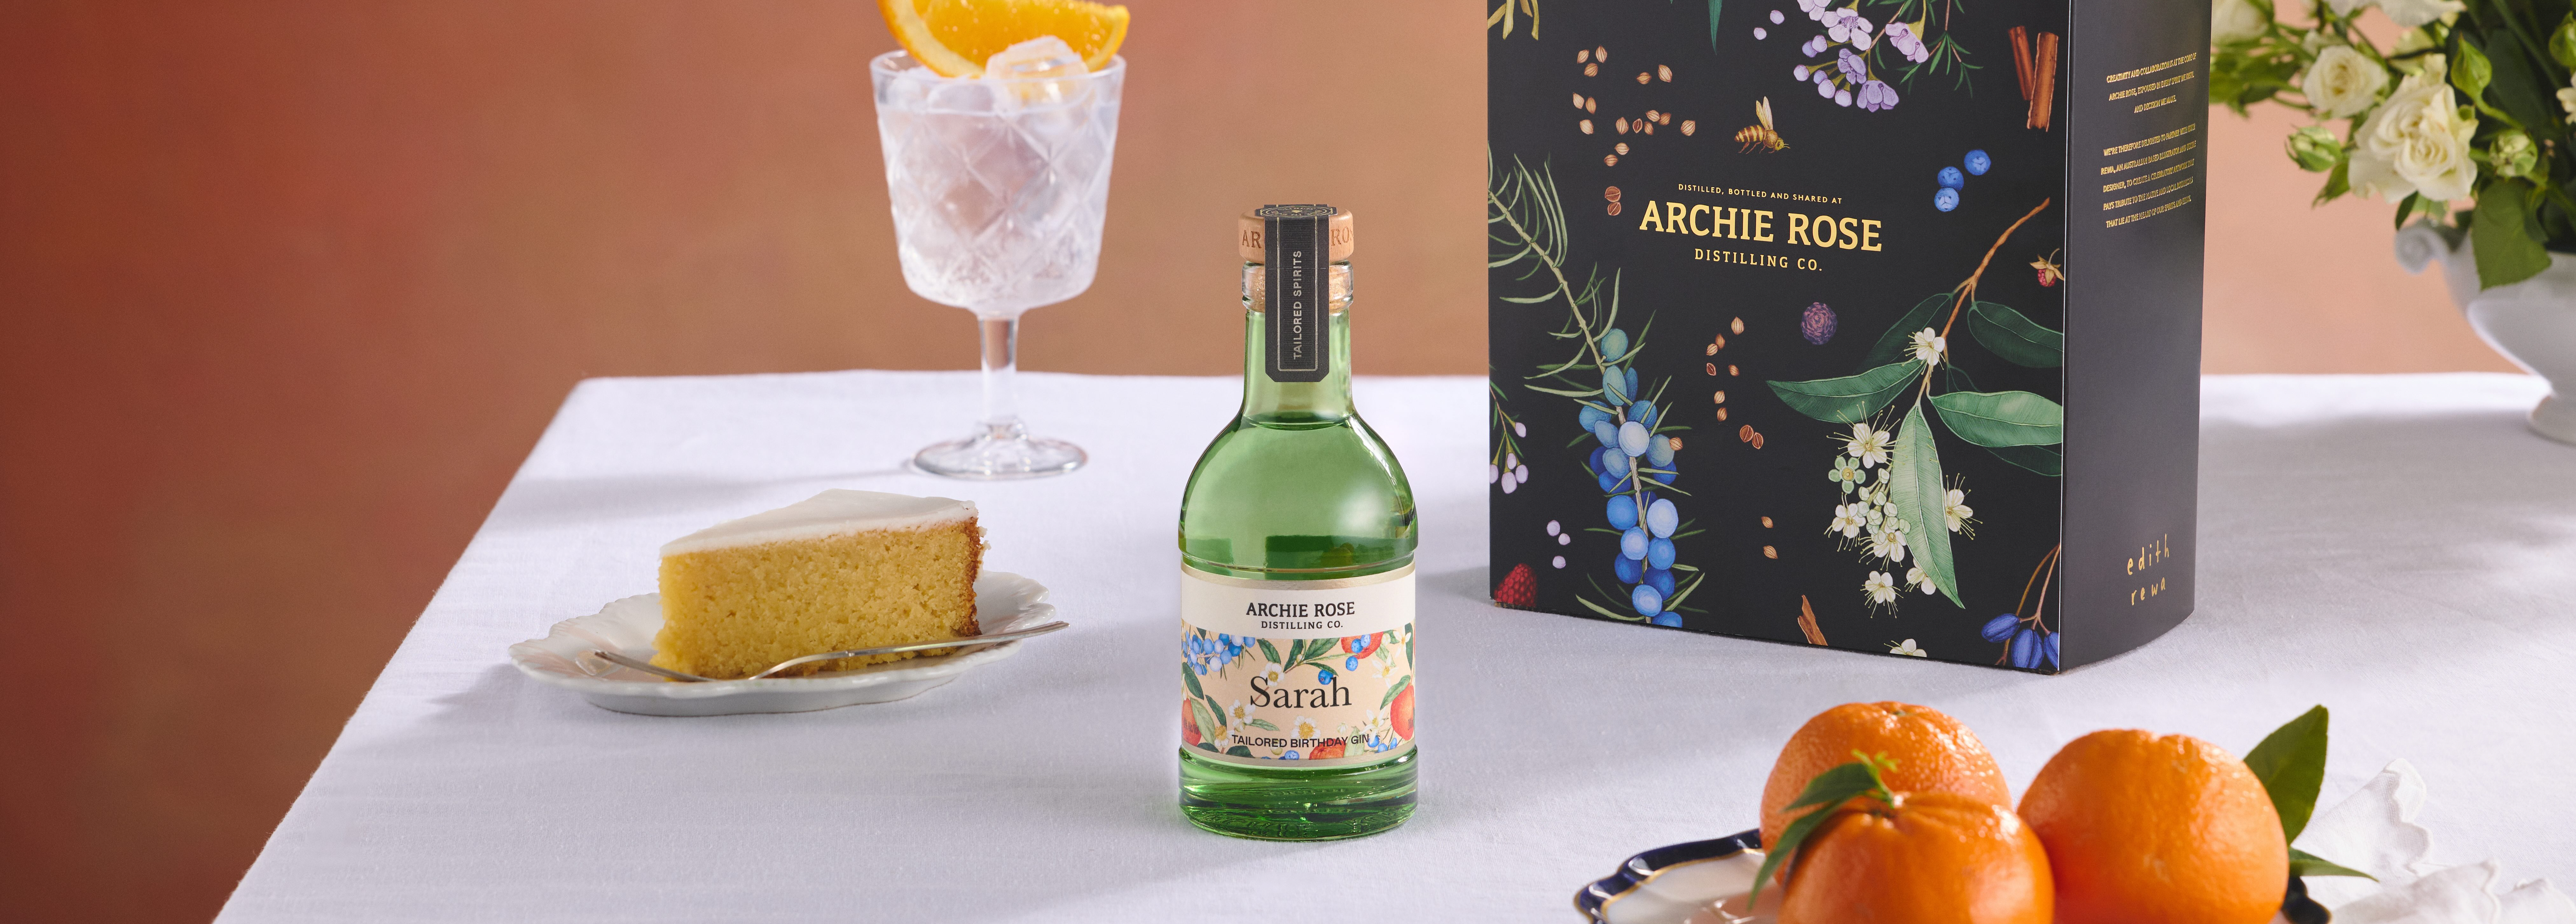 Archie Rose Gin